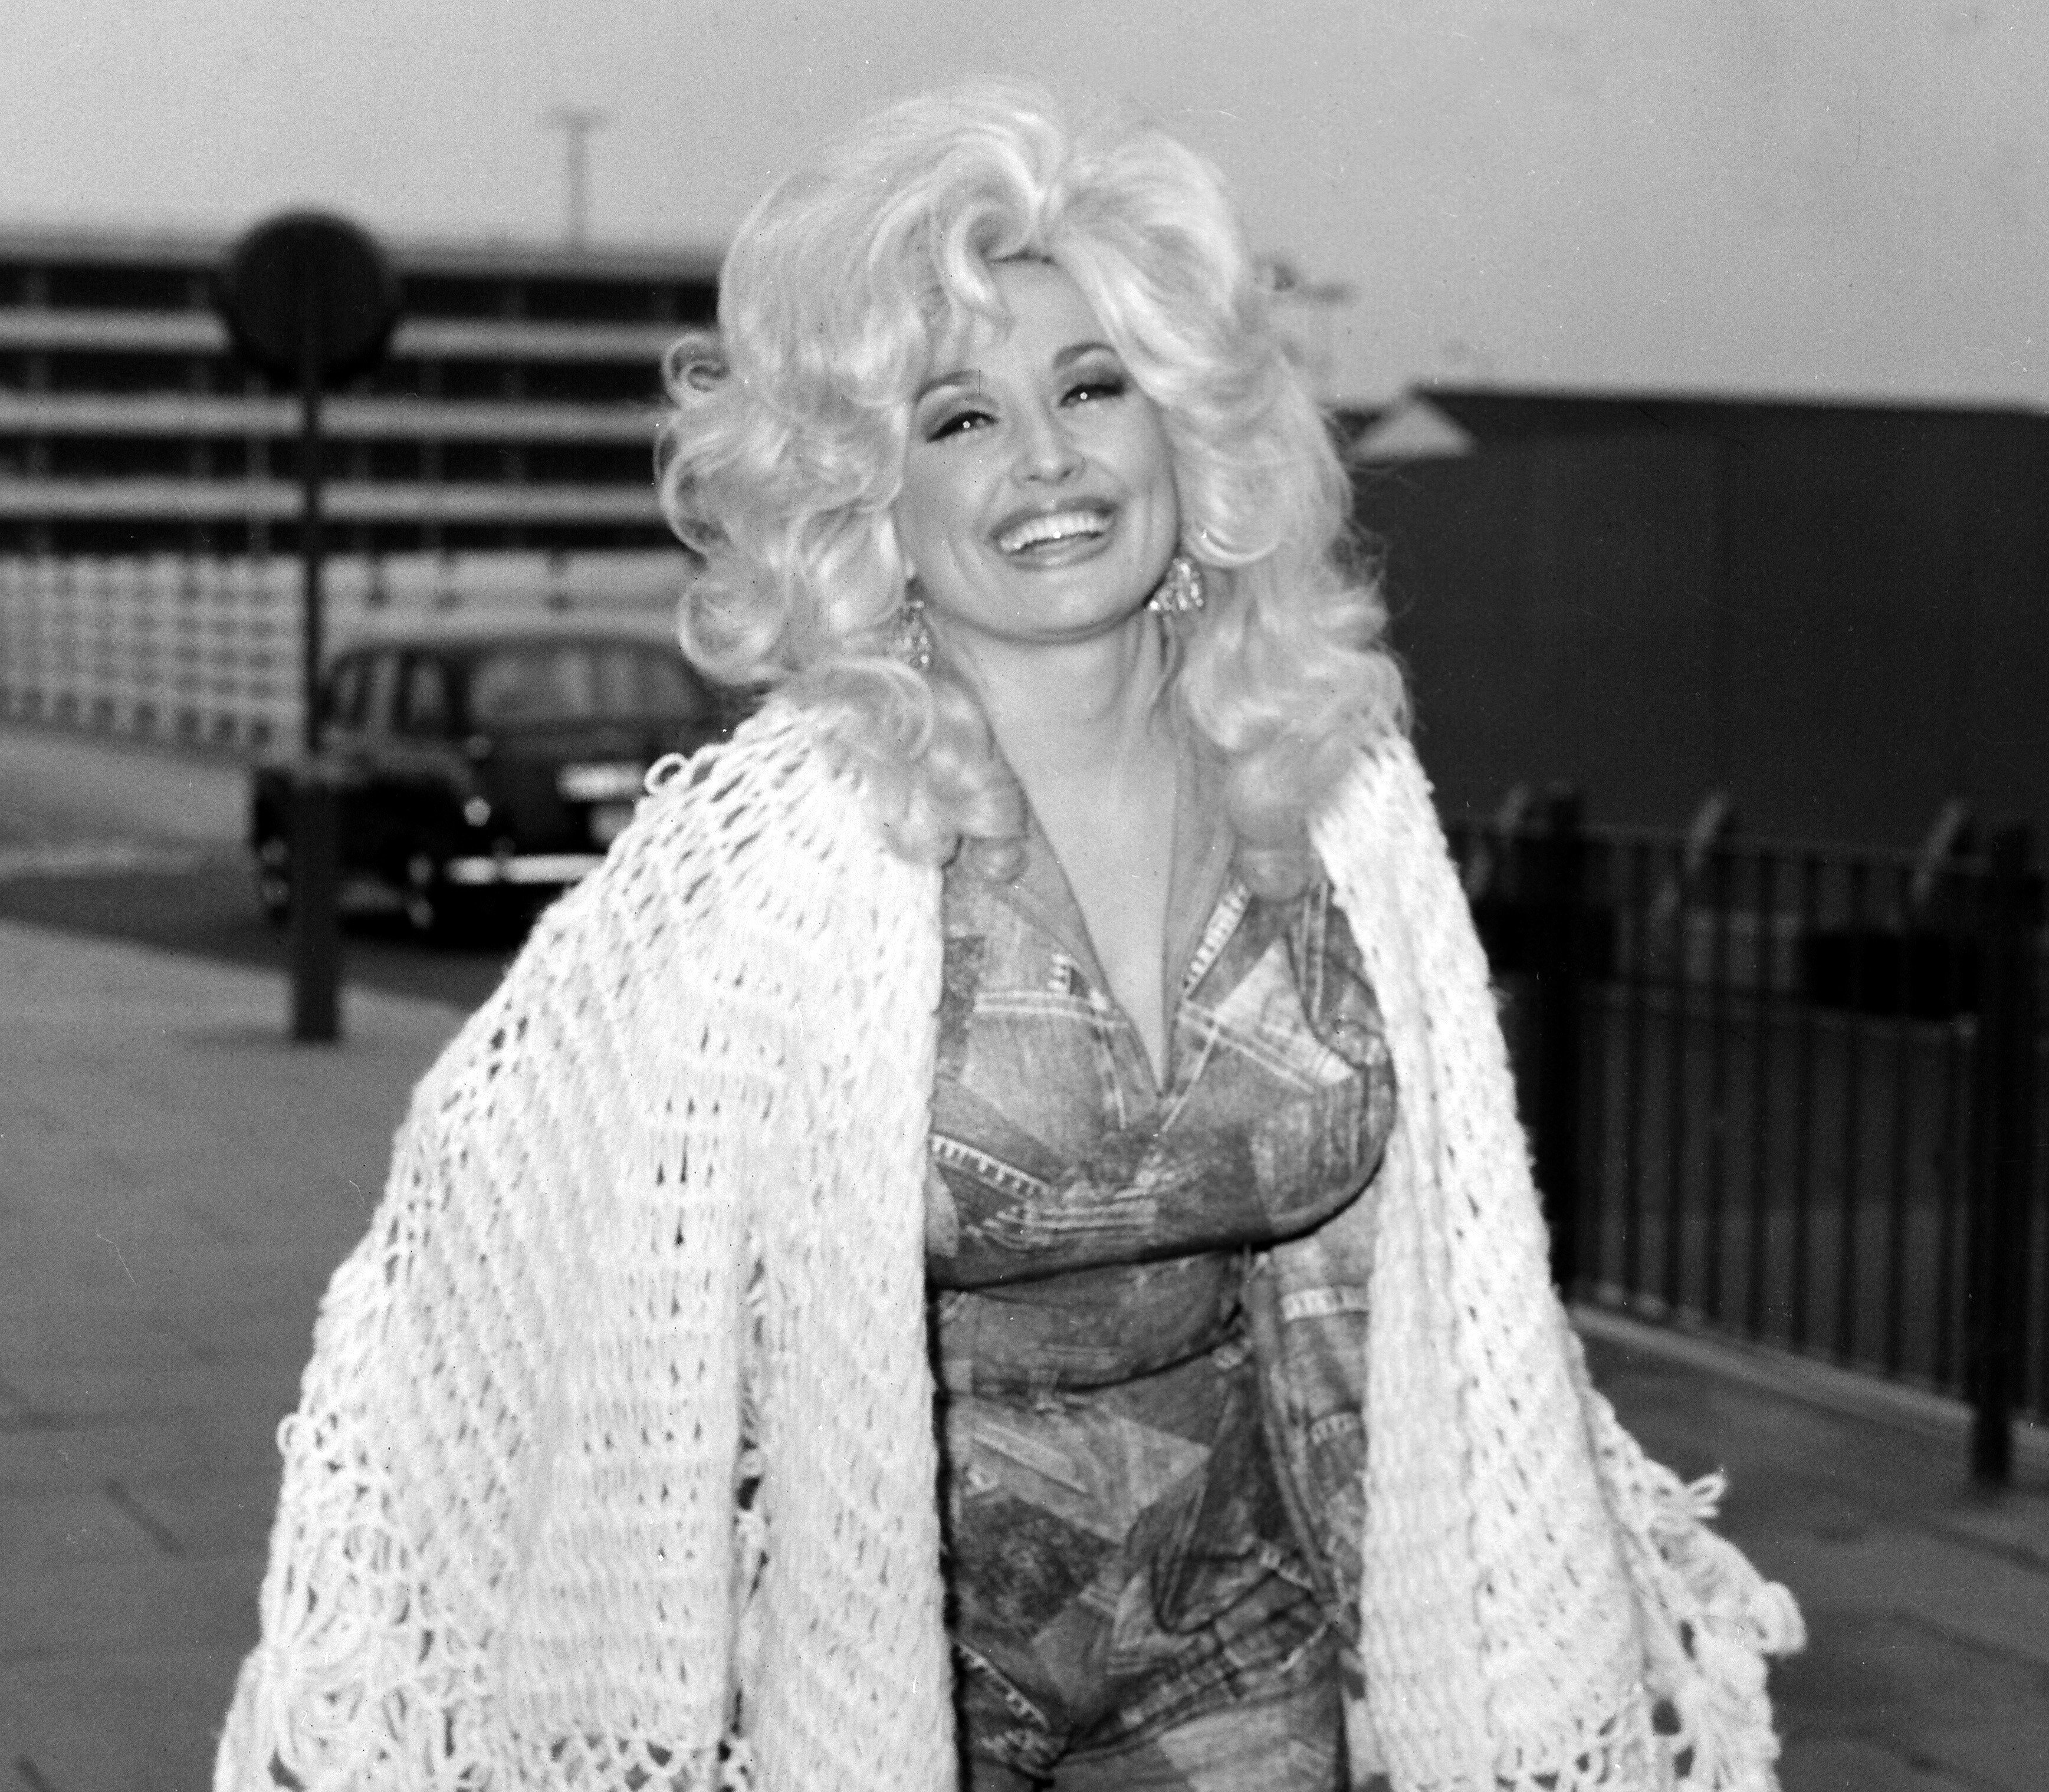 A black and white picture of a young Dolly Parton in a jumpsuit with a white knit blanket.